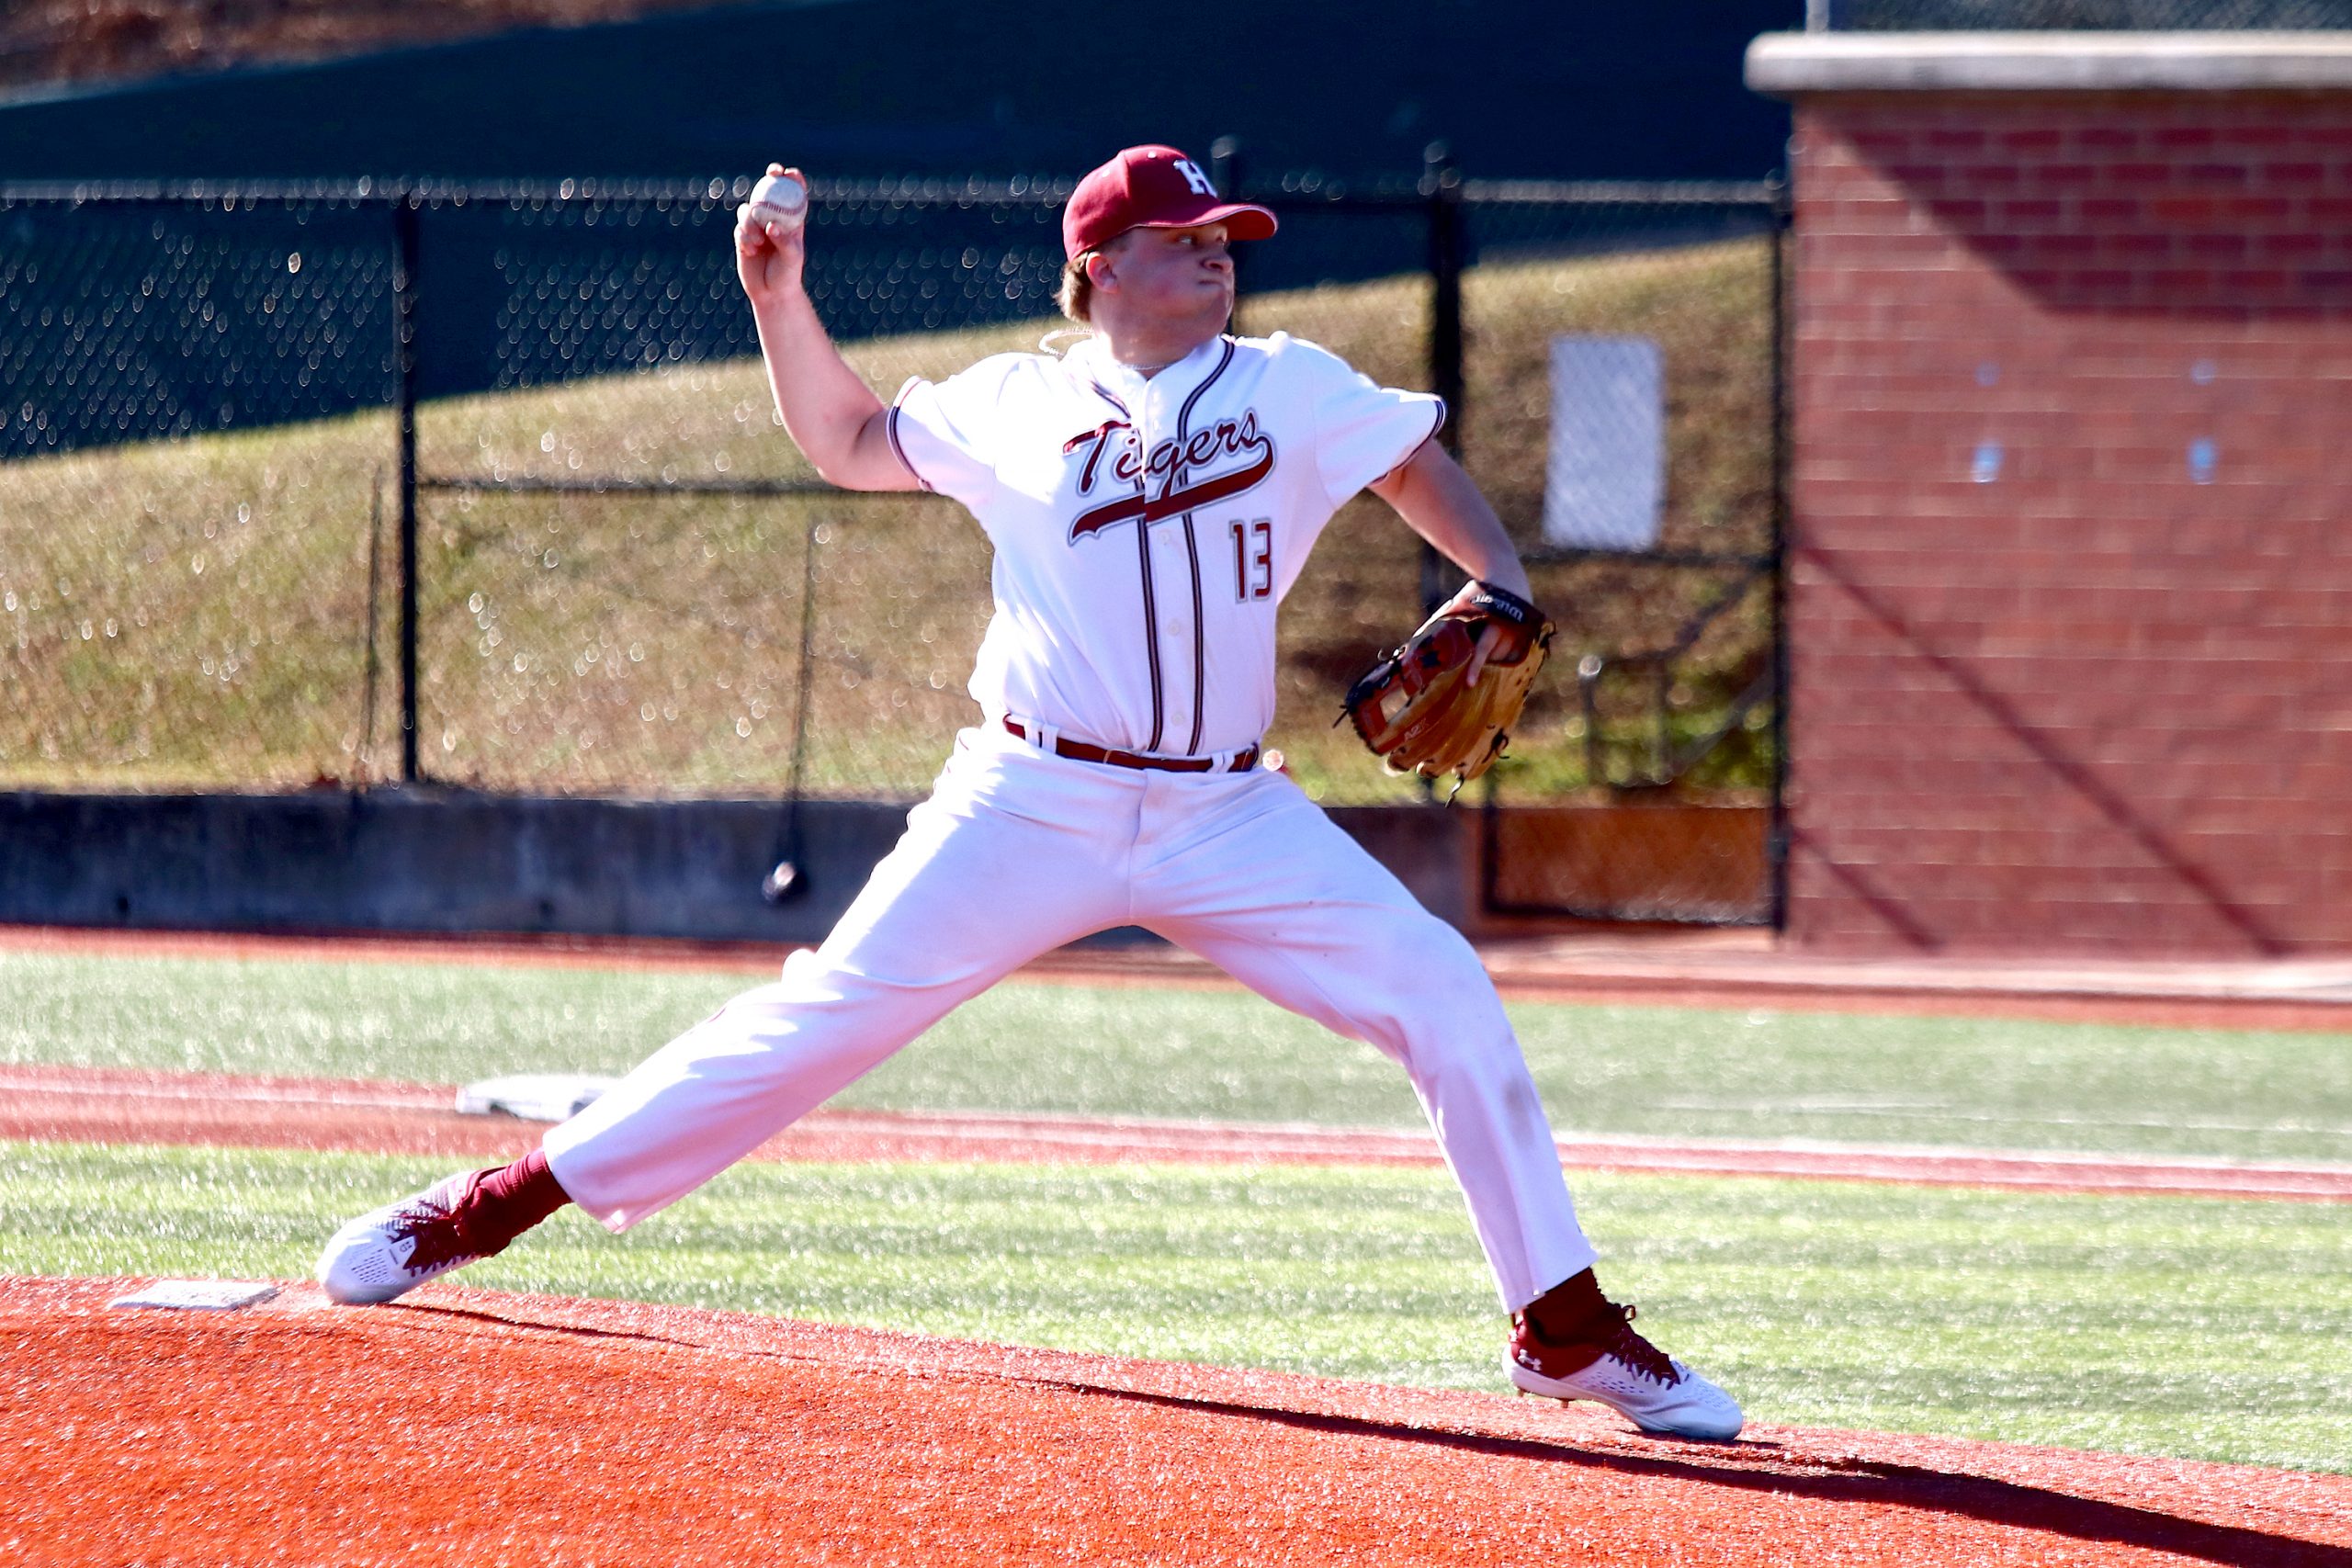 Greyson Howard pitches in a game earlier this season. Photo by Jim Meadows.